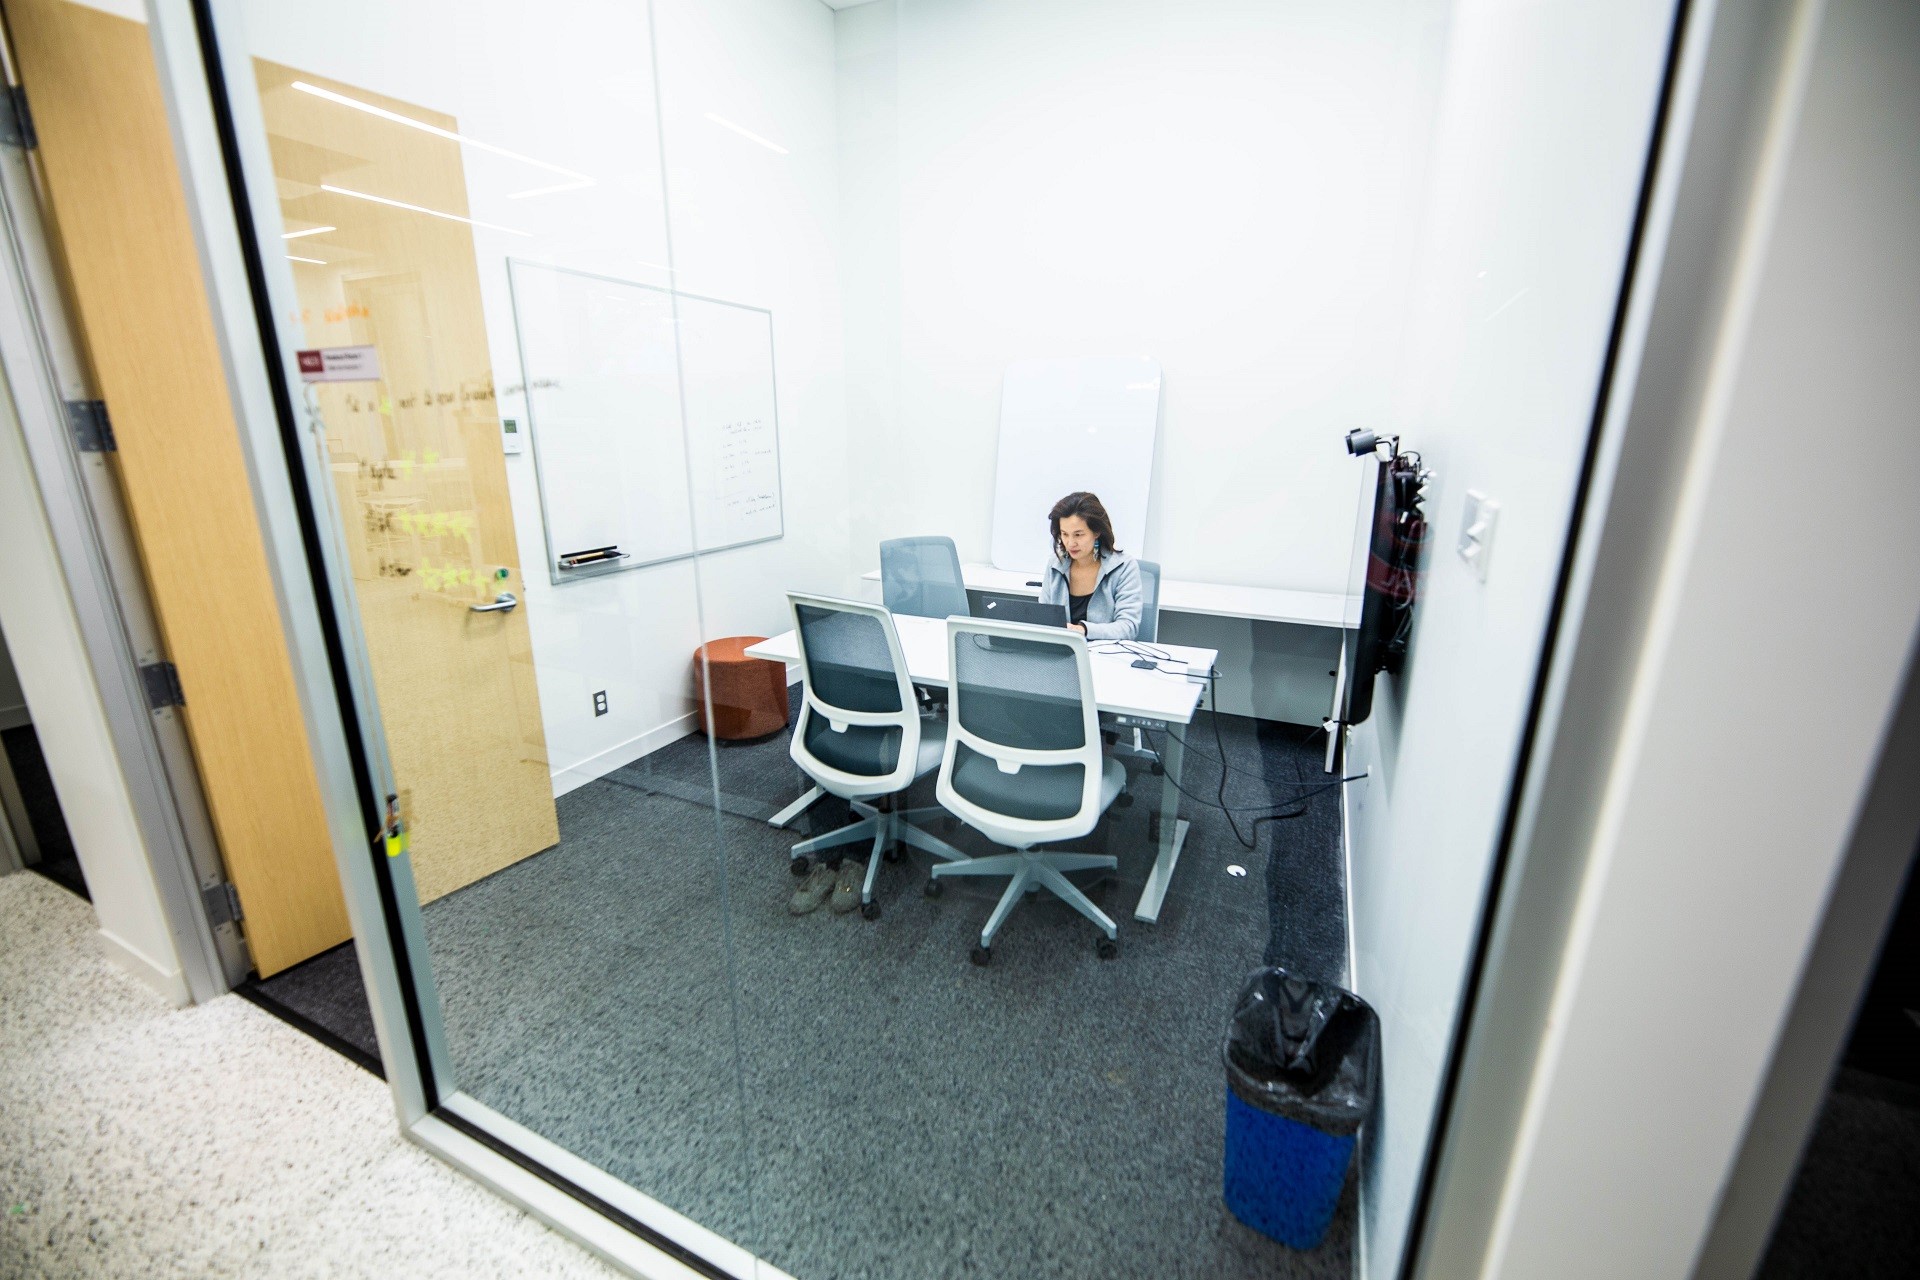 A person is sitting in the breakout room and working on their laptop. The room has clear glass walls and includes a white table, a white board, a TV screen and a recycle bin. 